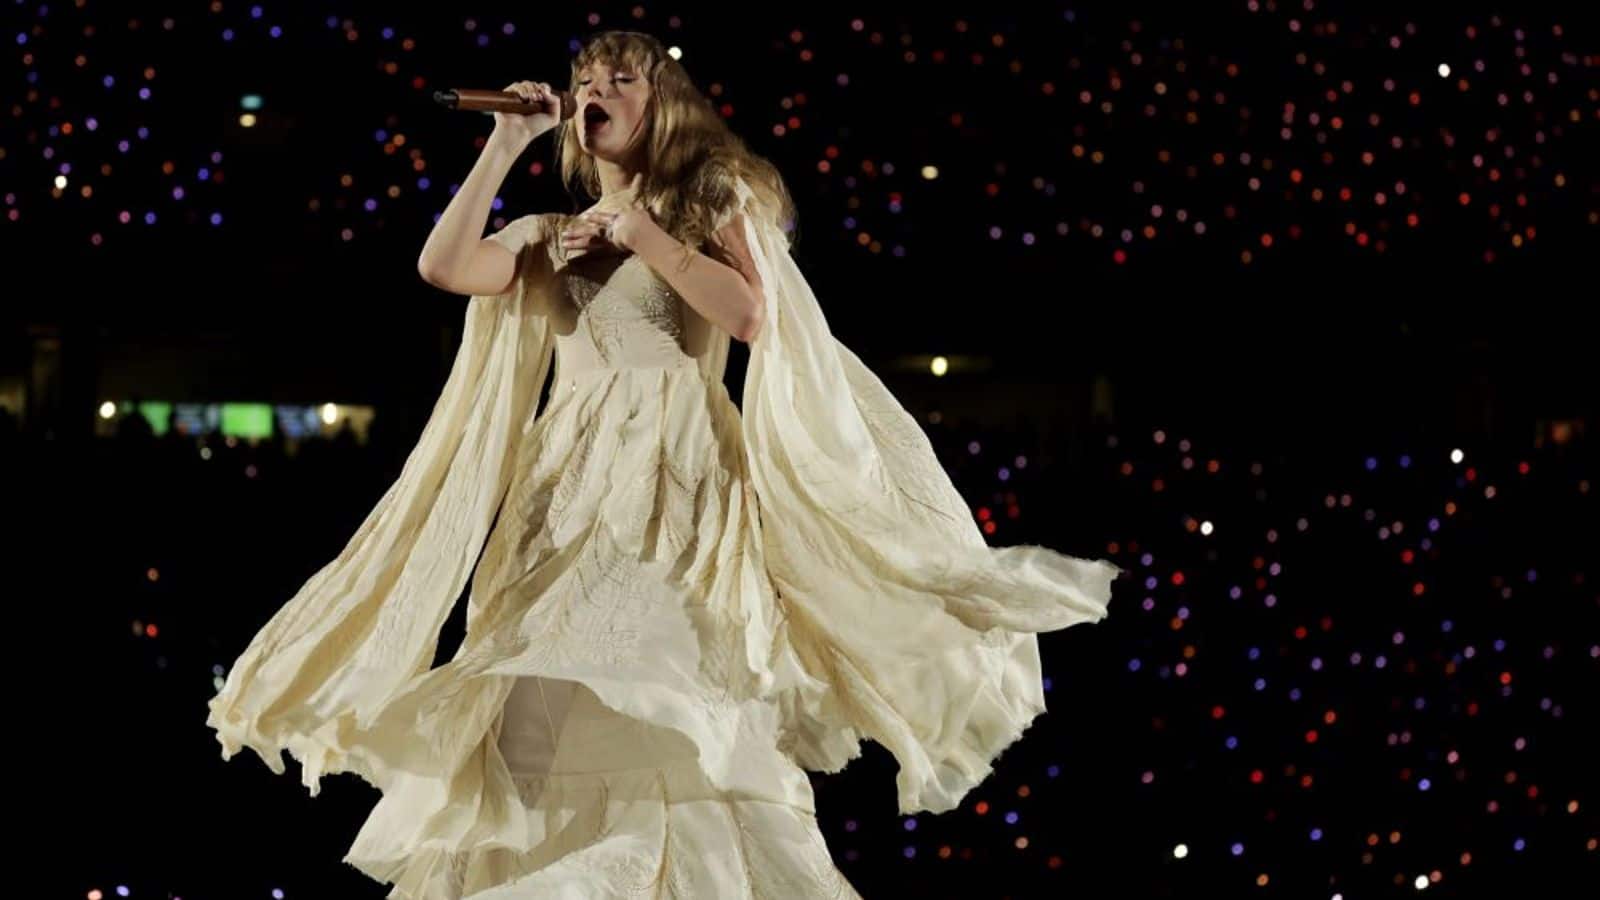 Taylor Swift's 'Tortured Poets Department' surpasses 200M streams on Spotify